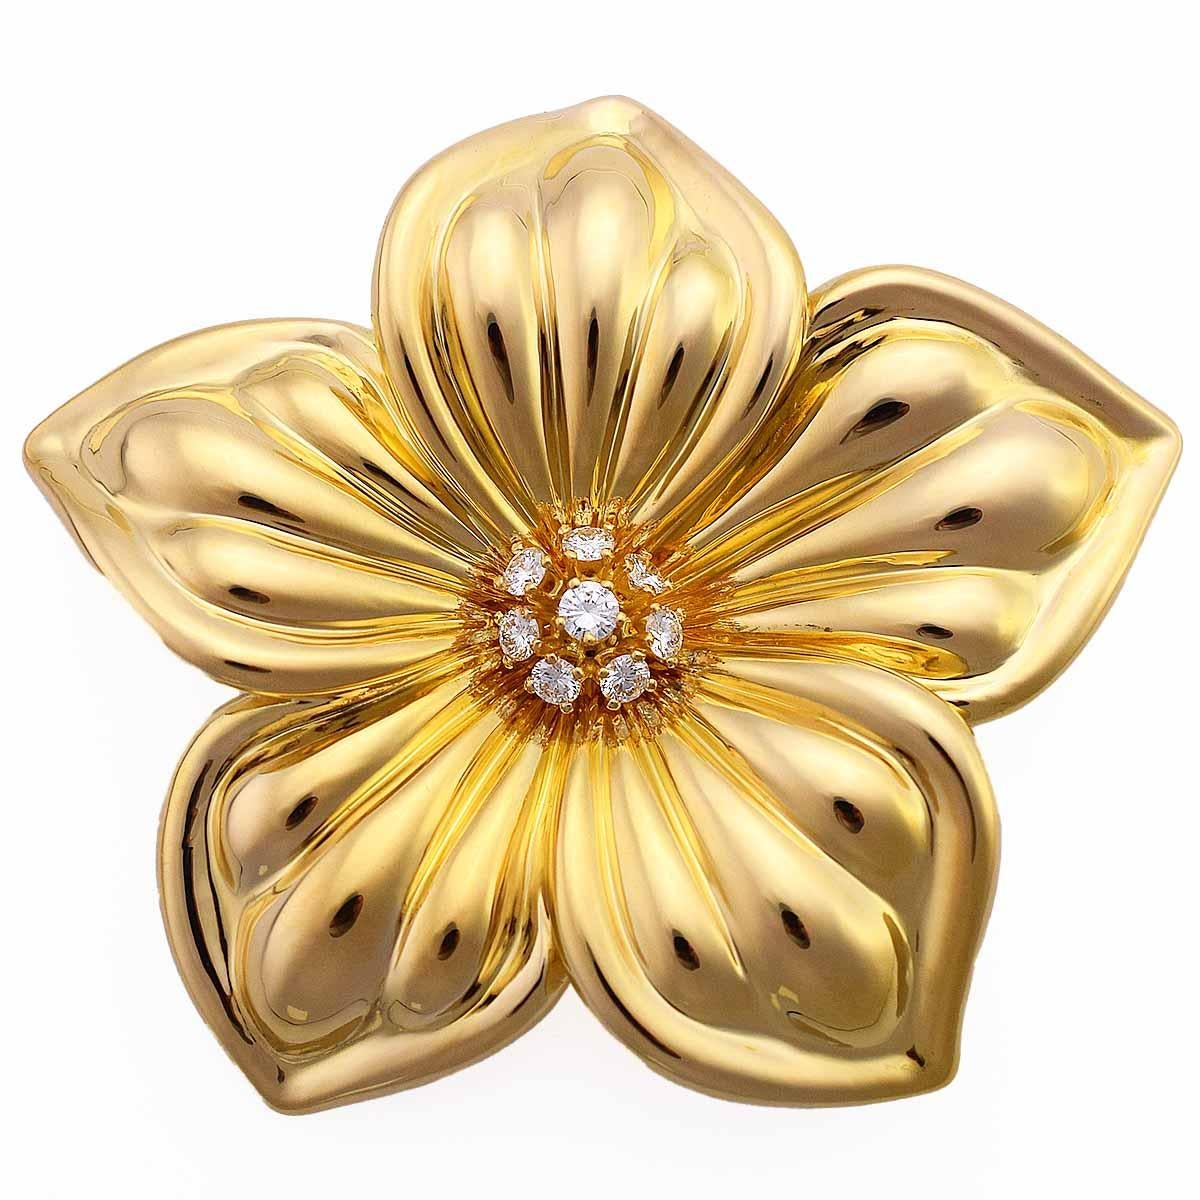 Brand:VanCleef&Arpels
Name:Vintage Diamond Flower Brooch
Material:8P diamond, 750 K18 YG WG yellow gold white gold
Weight:23.5g(Approx）
Size（inch）:  H61mm×W70mm  / H2.40in×W2.75in(Approx）
Comes with:Van Cleef & Arpels Box, Case, VCA Repair Statement